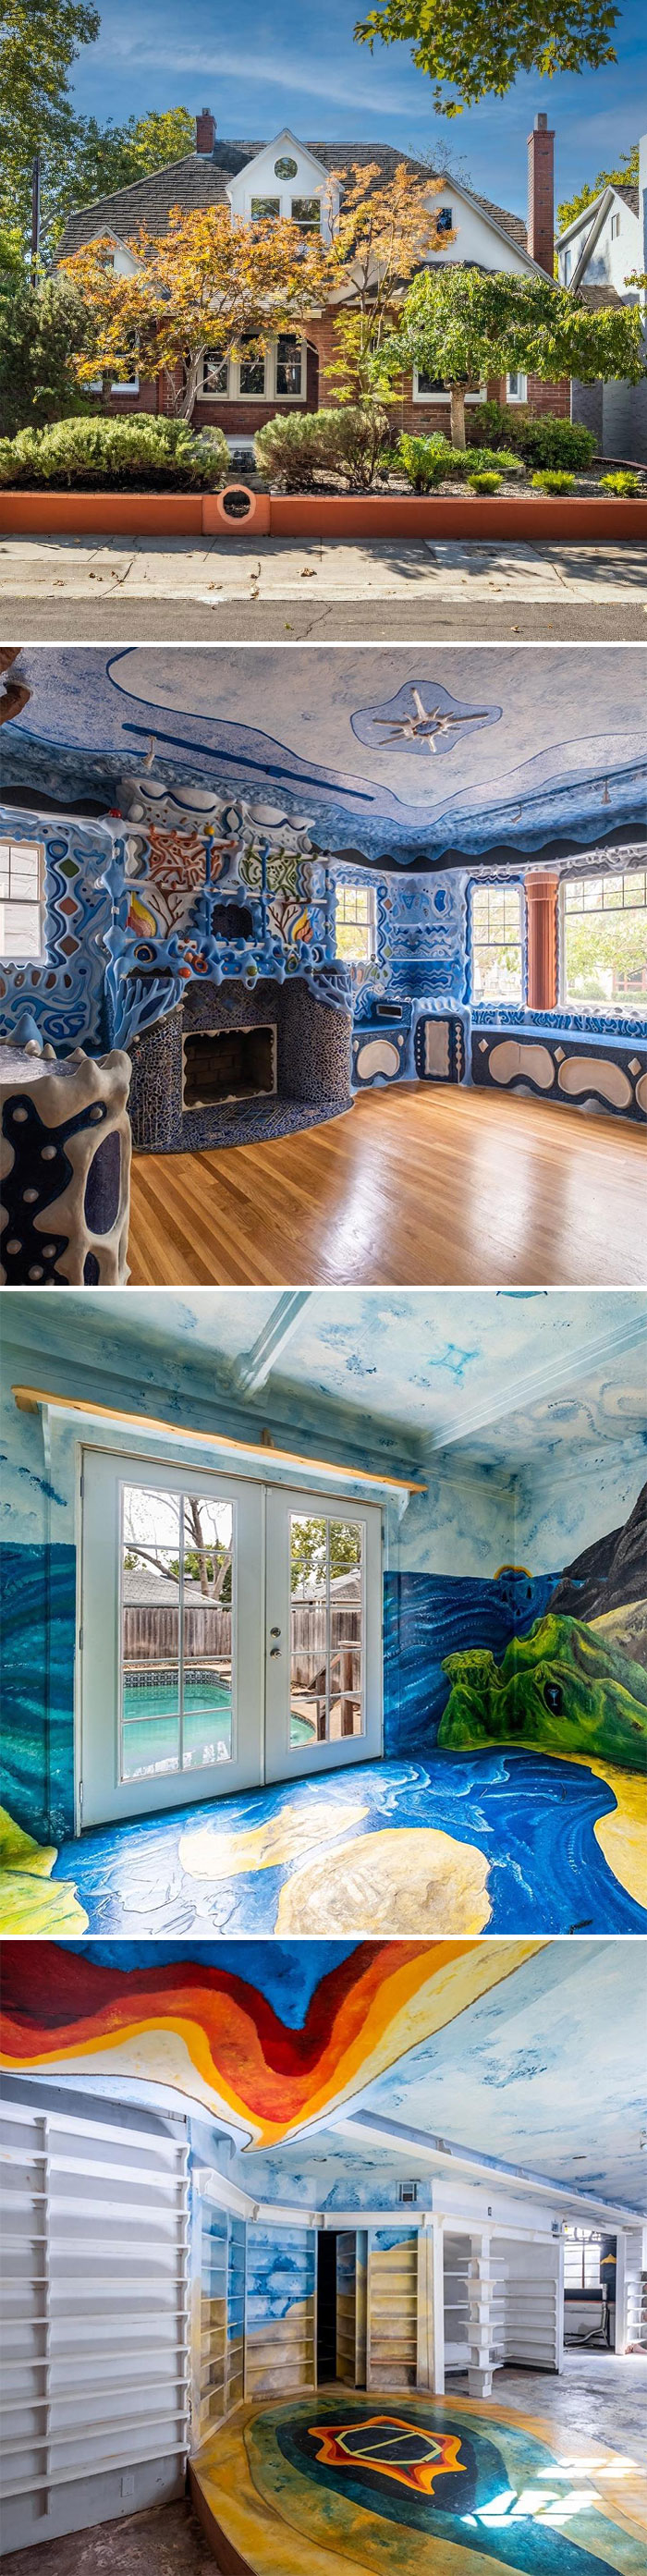 You Never Know What’s Going On Inside A Home Part 29042390432490. Per The Listing, The “Artwork Throughout The House Was Done By The Seller And Was Made With Caulk, Styrofoam And Wood”. Currently Listed For $825,000 In Sacramento, Ca. 4 Bd, 2 Ba. 2,320 Sq Ft